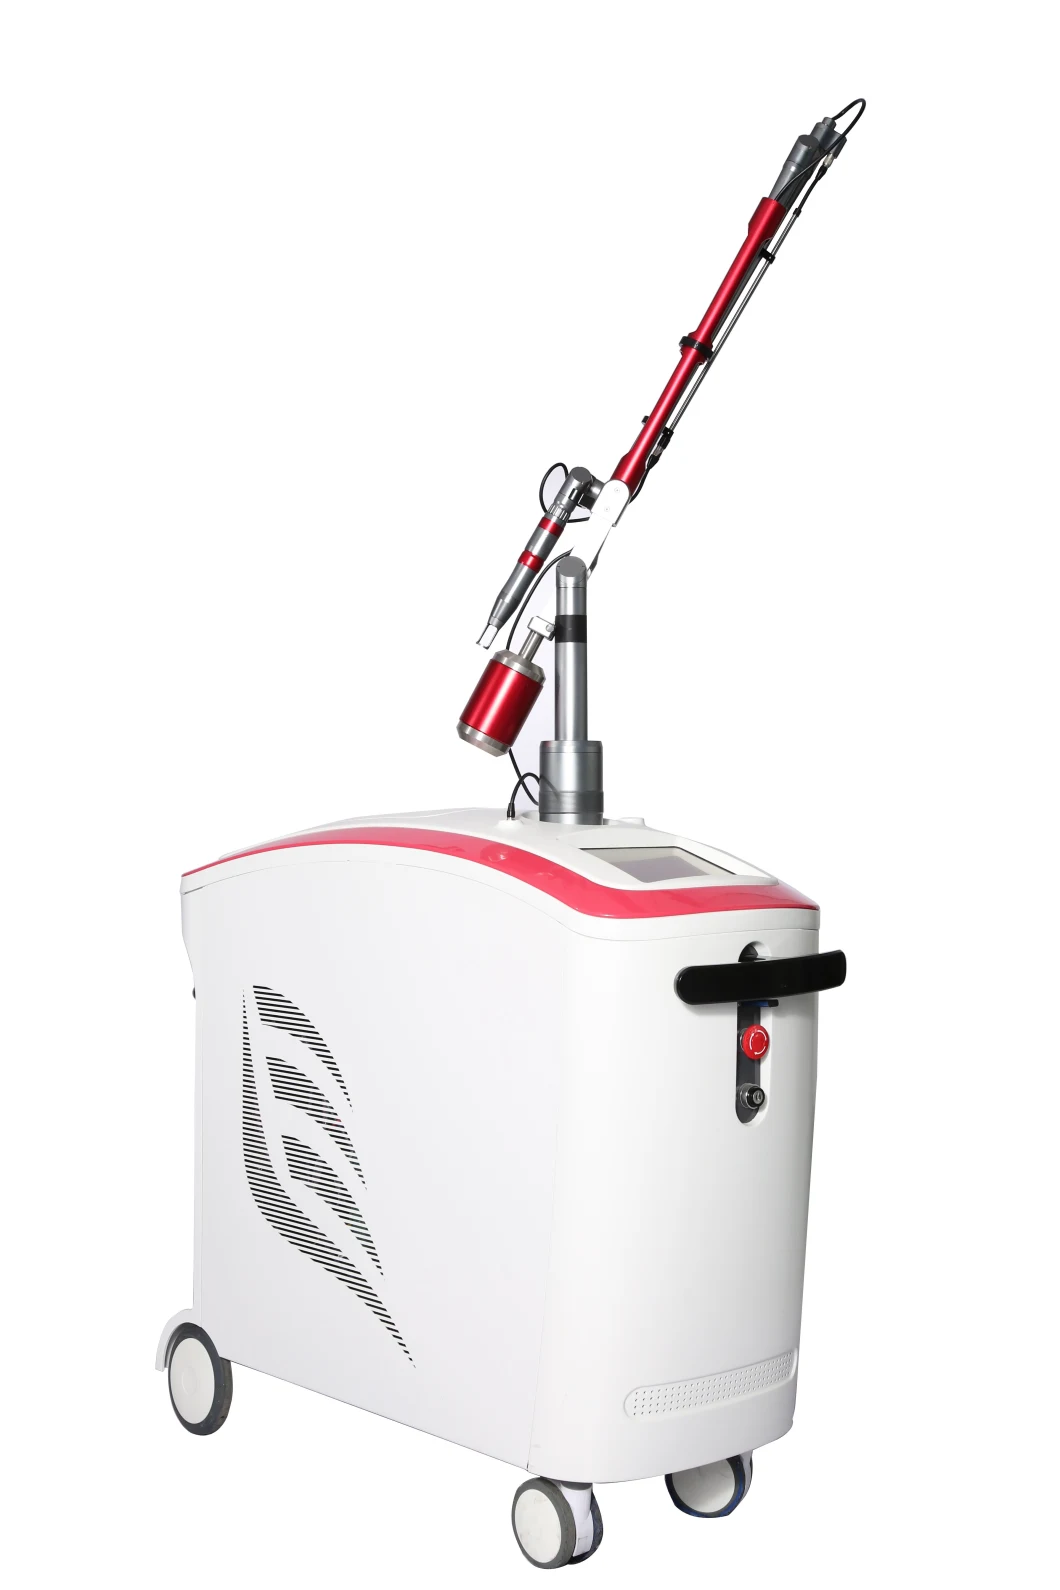 Acne Scars Removal Effective Picosecond Laser Tattoo Removal Beauty Equipment